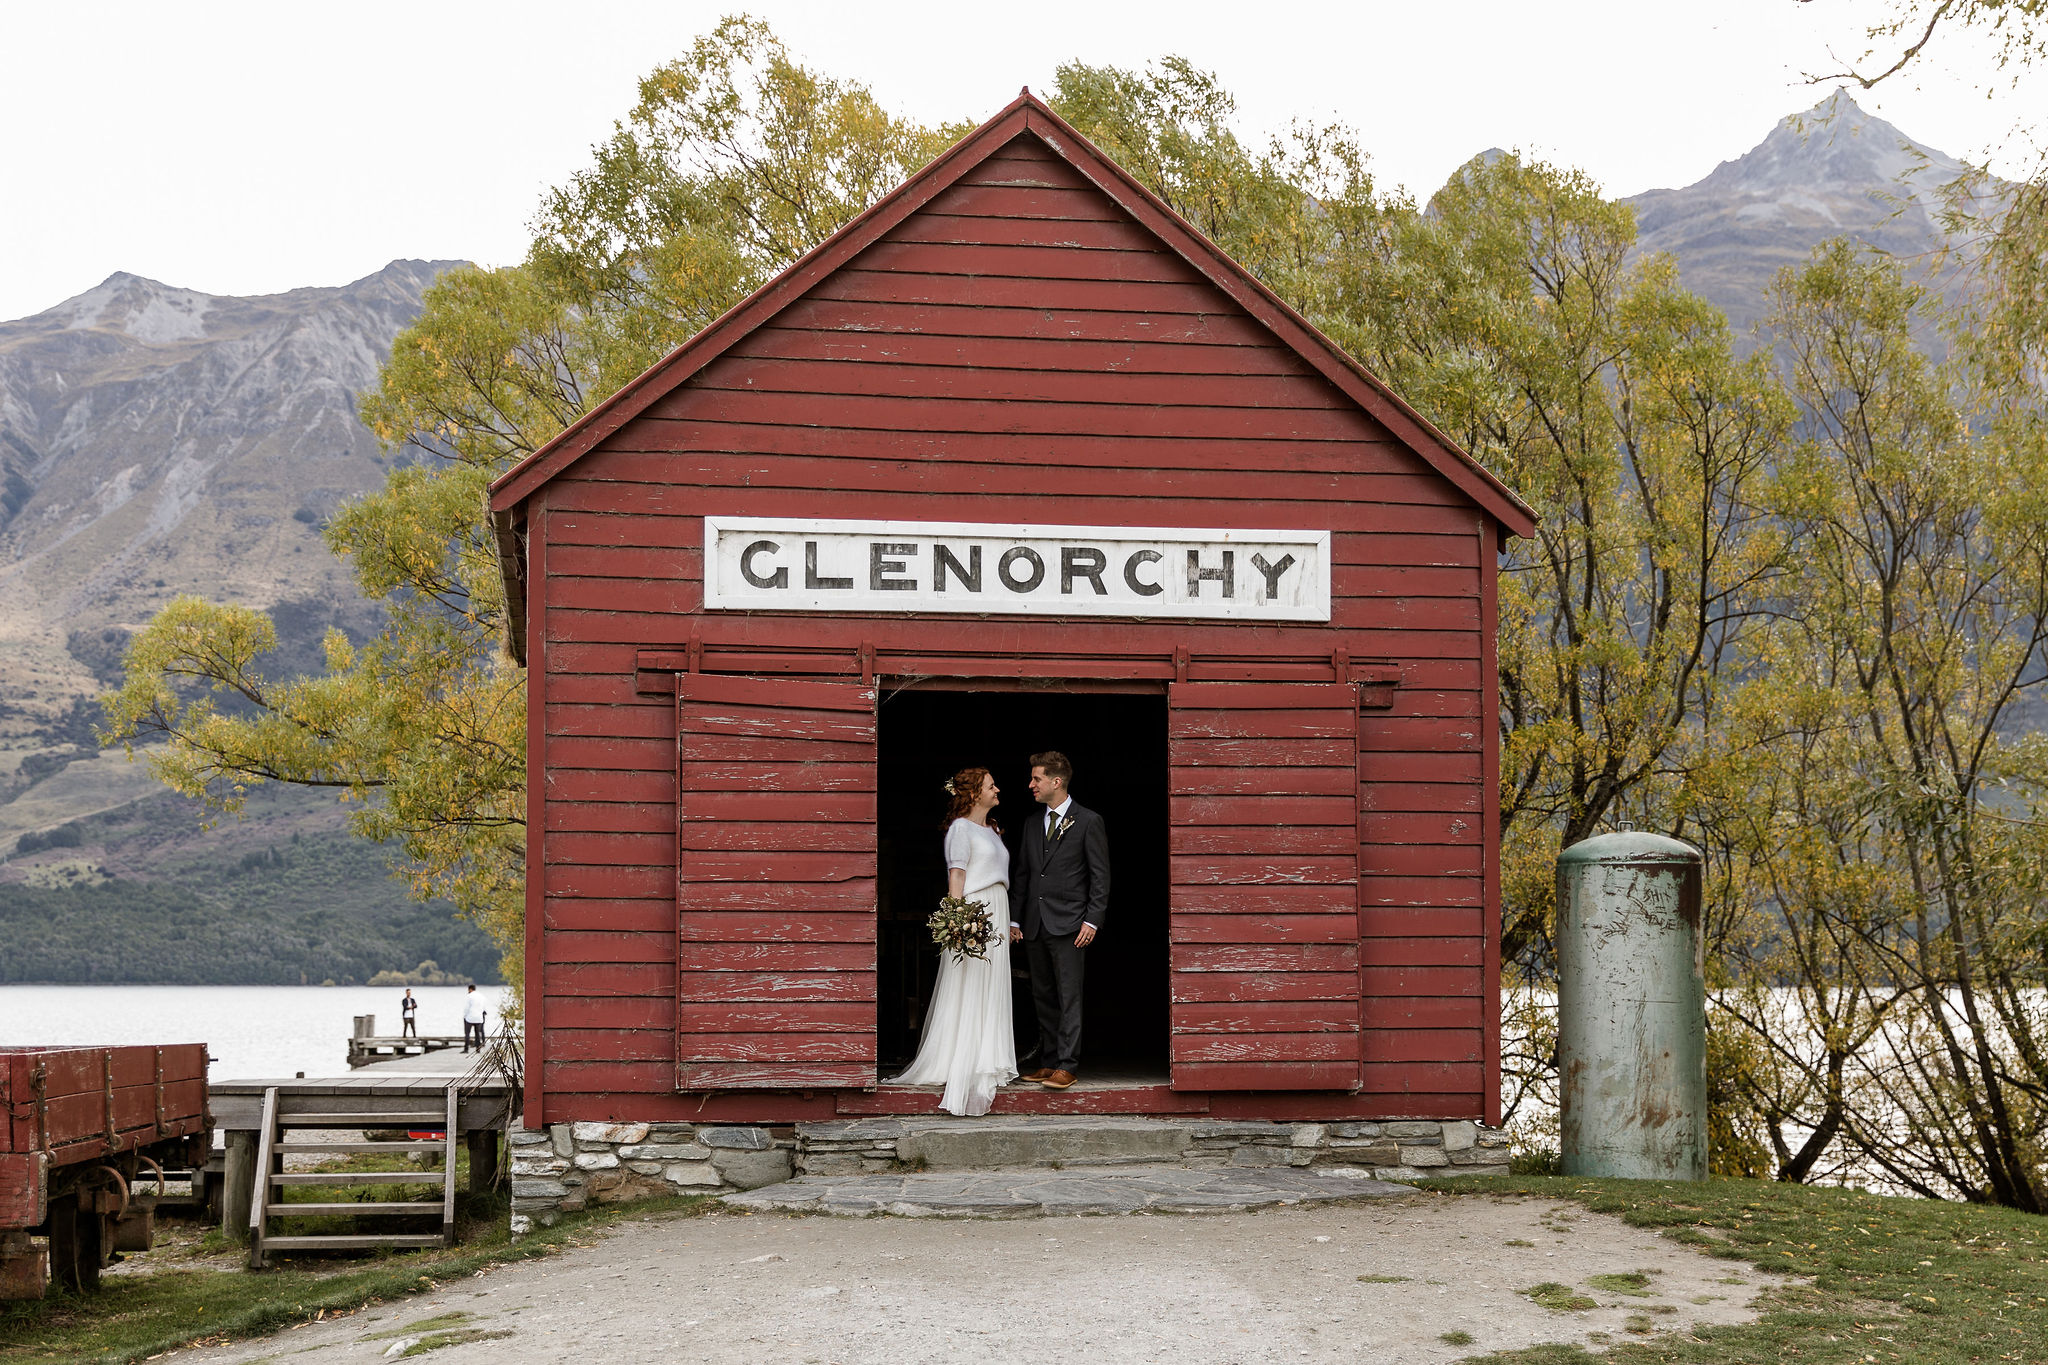 Glenorchy Wharf Shed - Susan Miller Photography